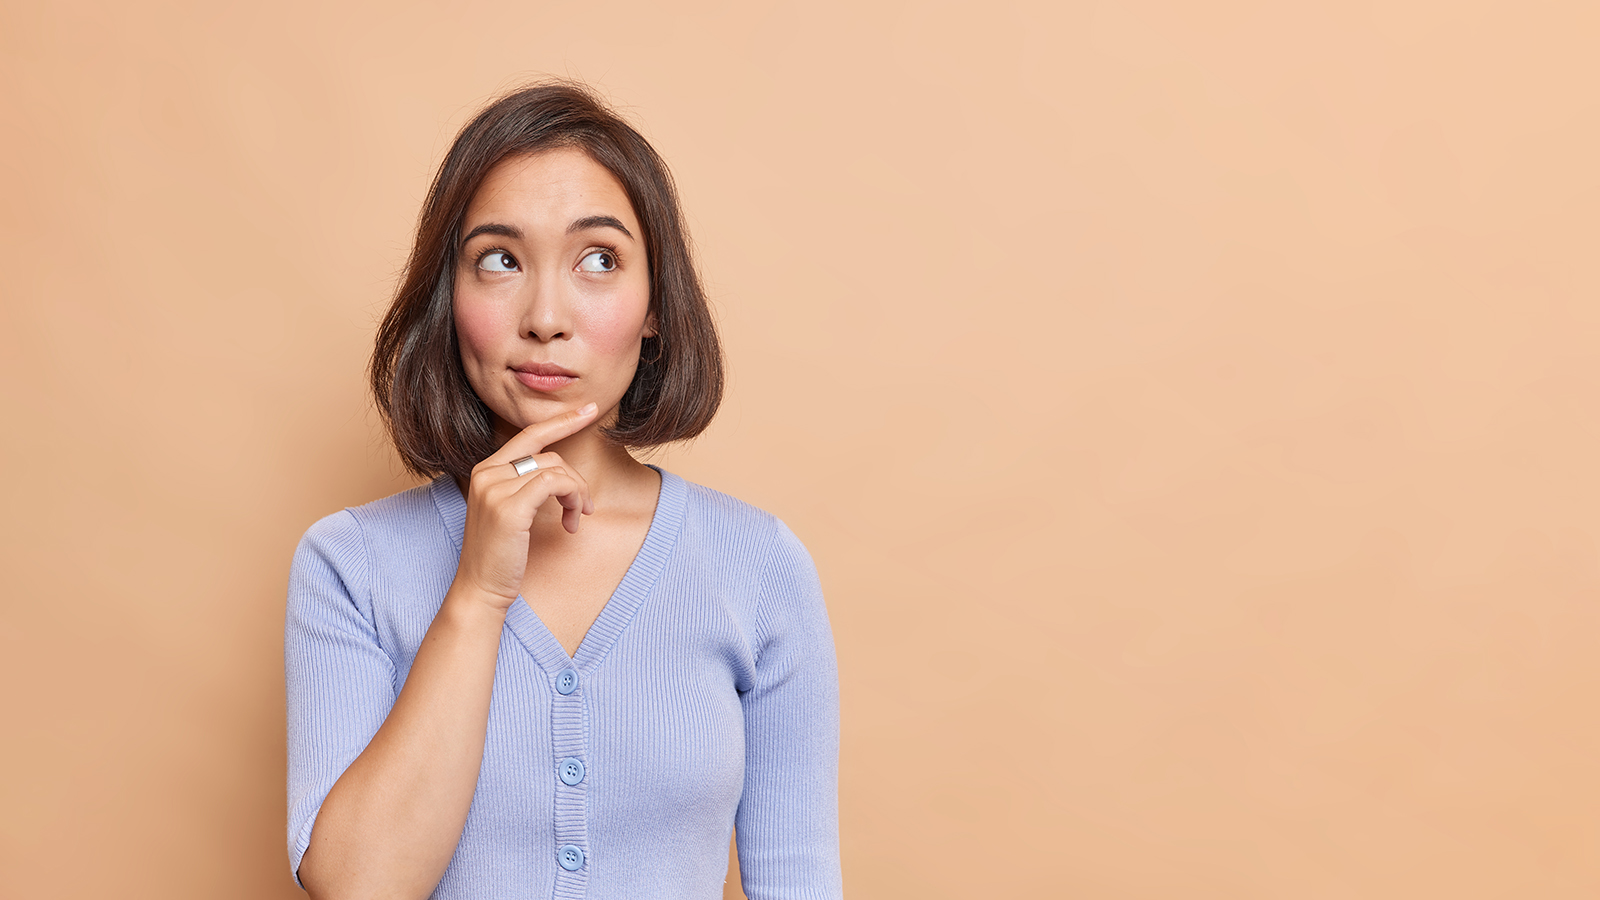 Thoughtful Asian woman keeps hand on chin looks pensively above dressed in casual blue jumper poses against brown background blank copy space for your advertising content thinks about future